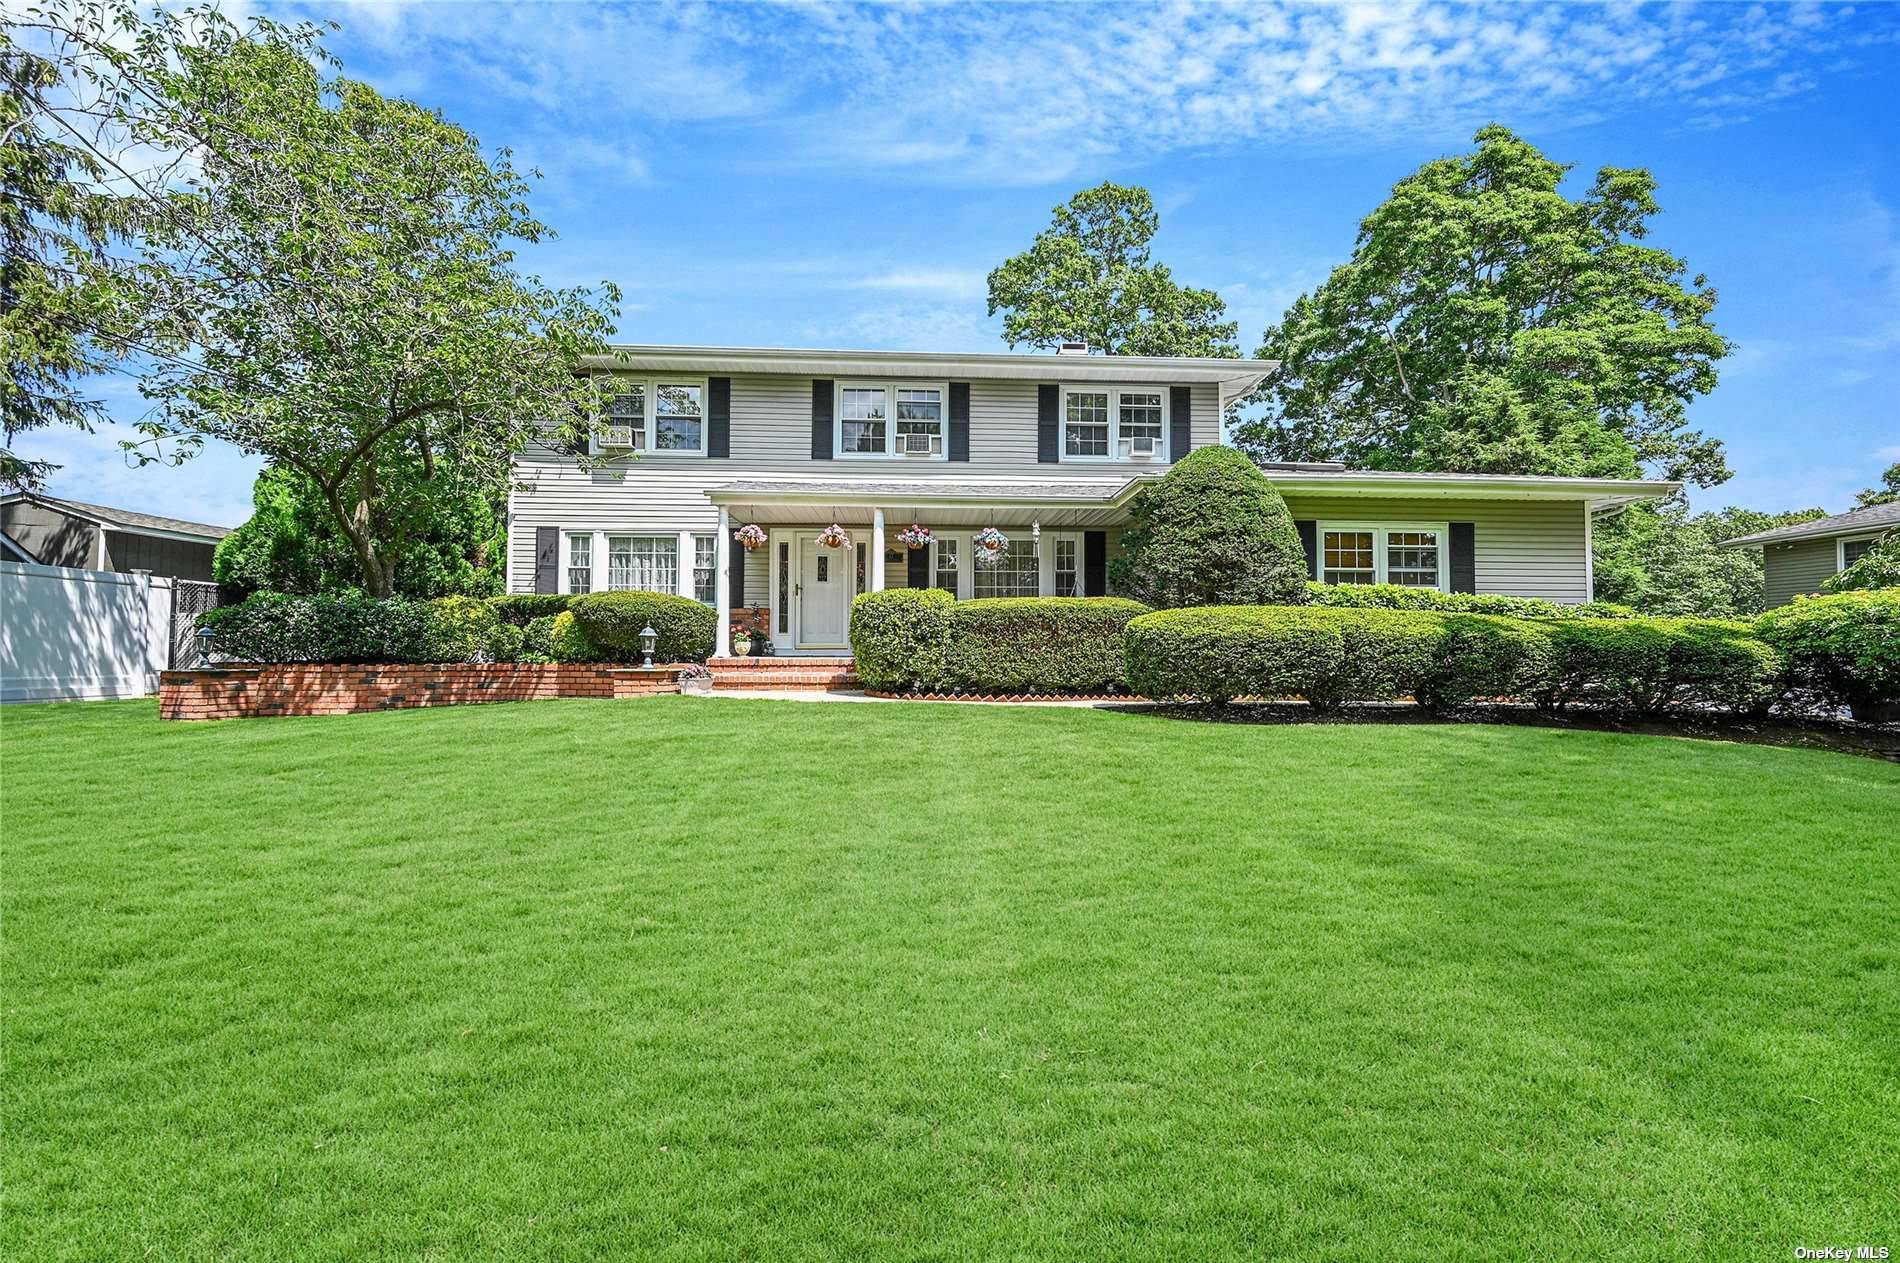 Magnificent central hall colonial located on a private idyllic street located in the much thought after Crestwood Forest neighborhood in the quaint Village of Lake Grove.